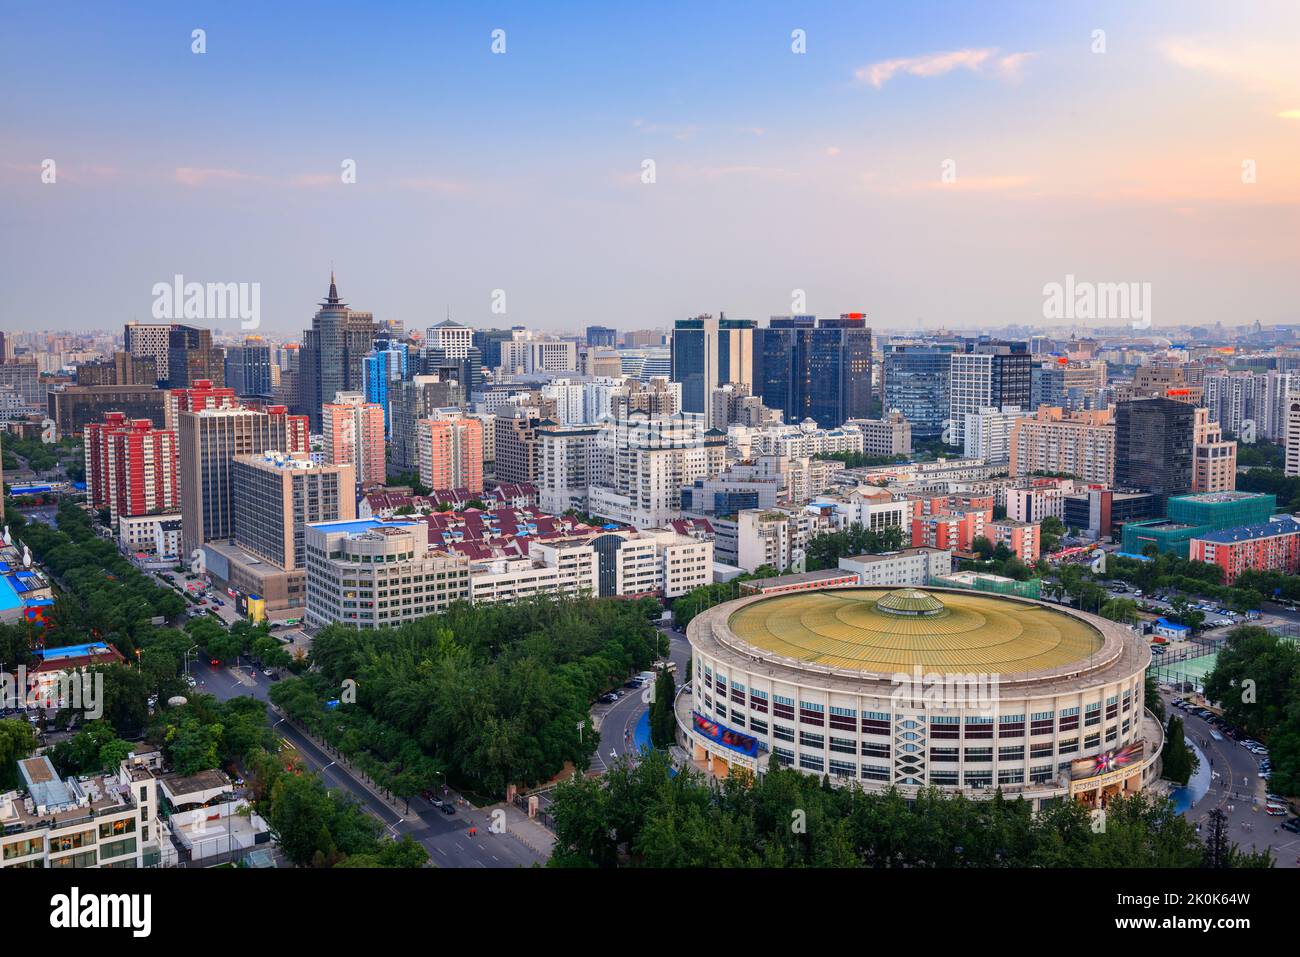 Beijing, China cityscape and arena at dusk. Stock Photo